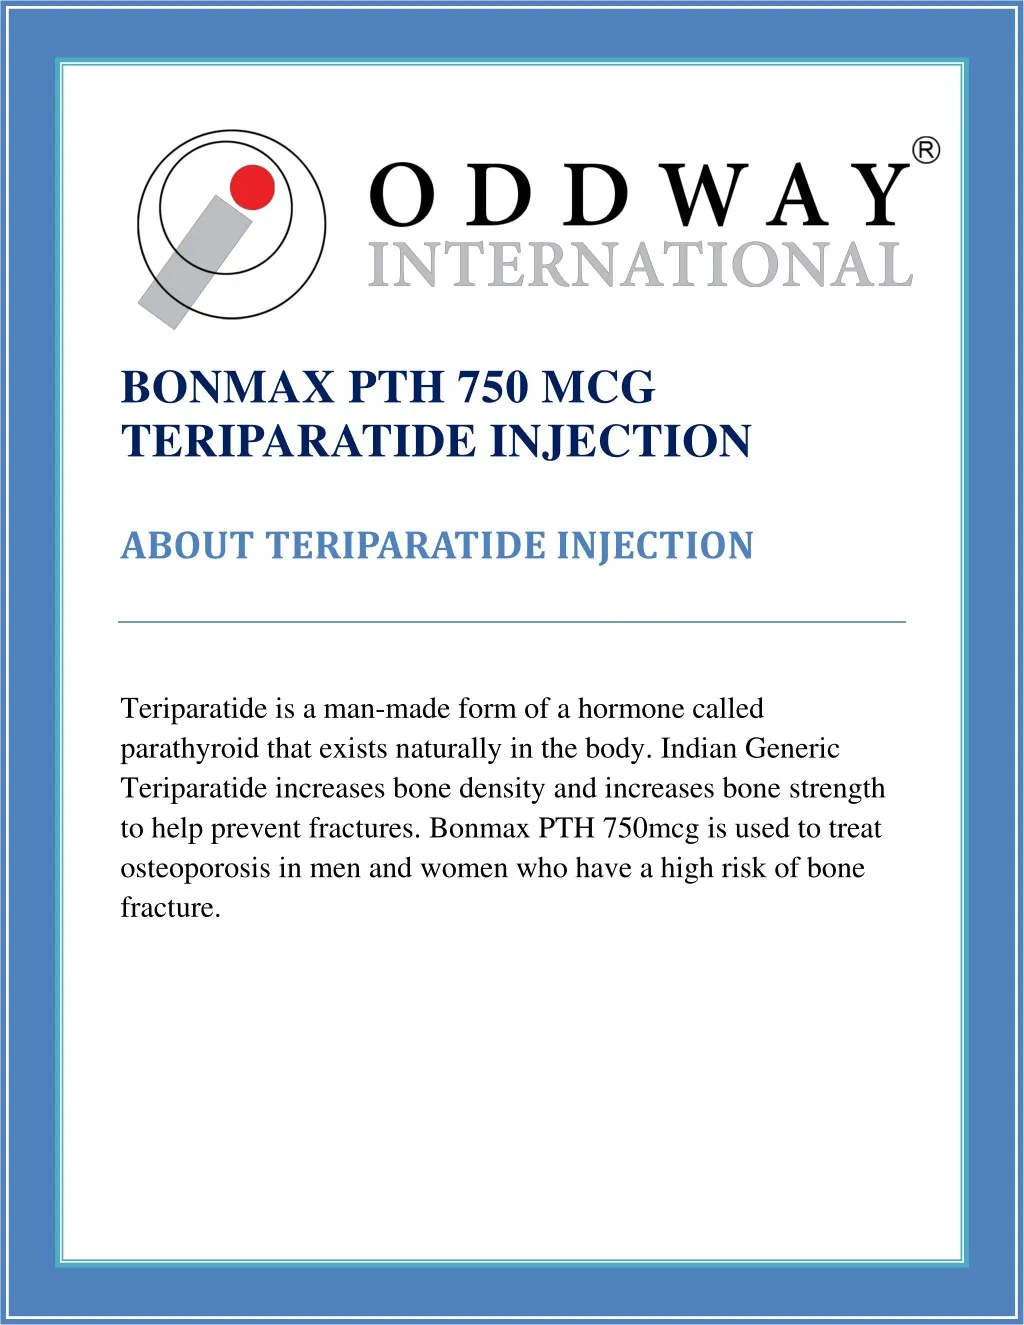 bonmax pth 750 mcg teriparatide injection about